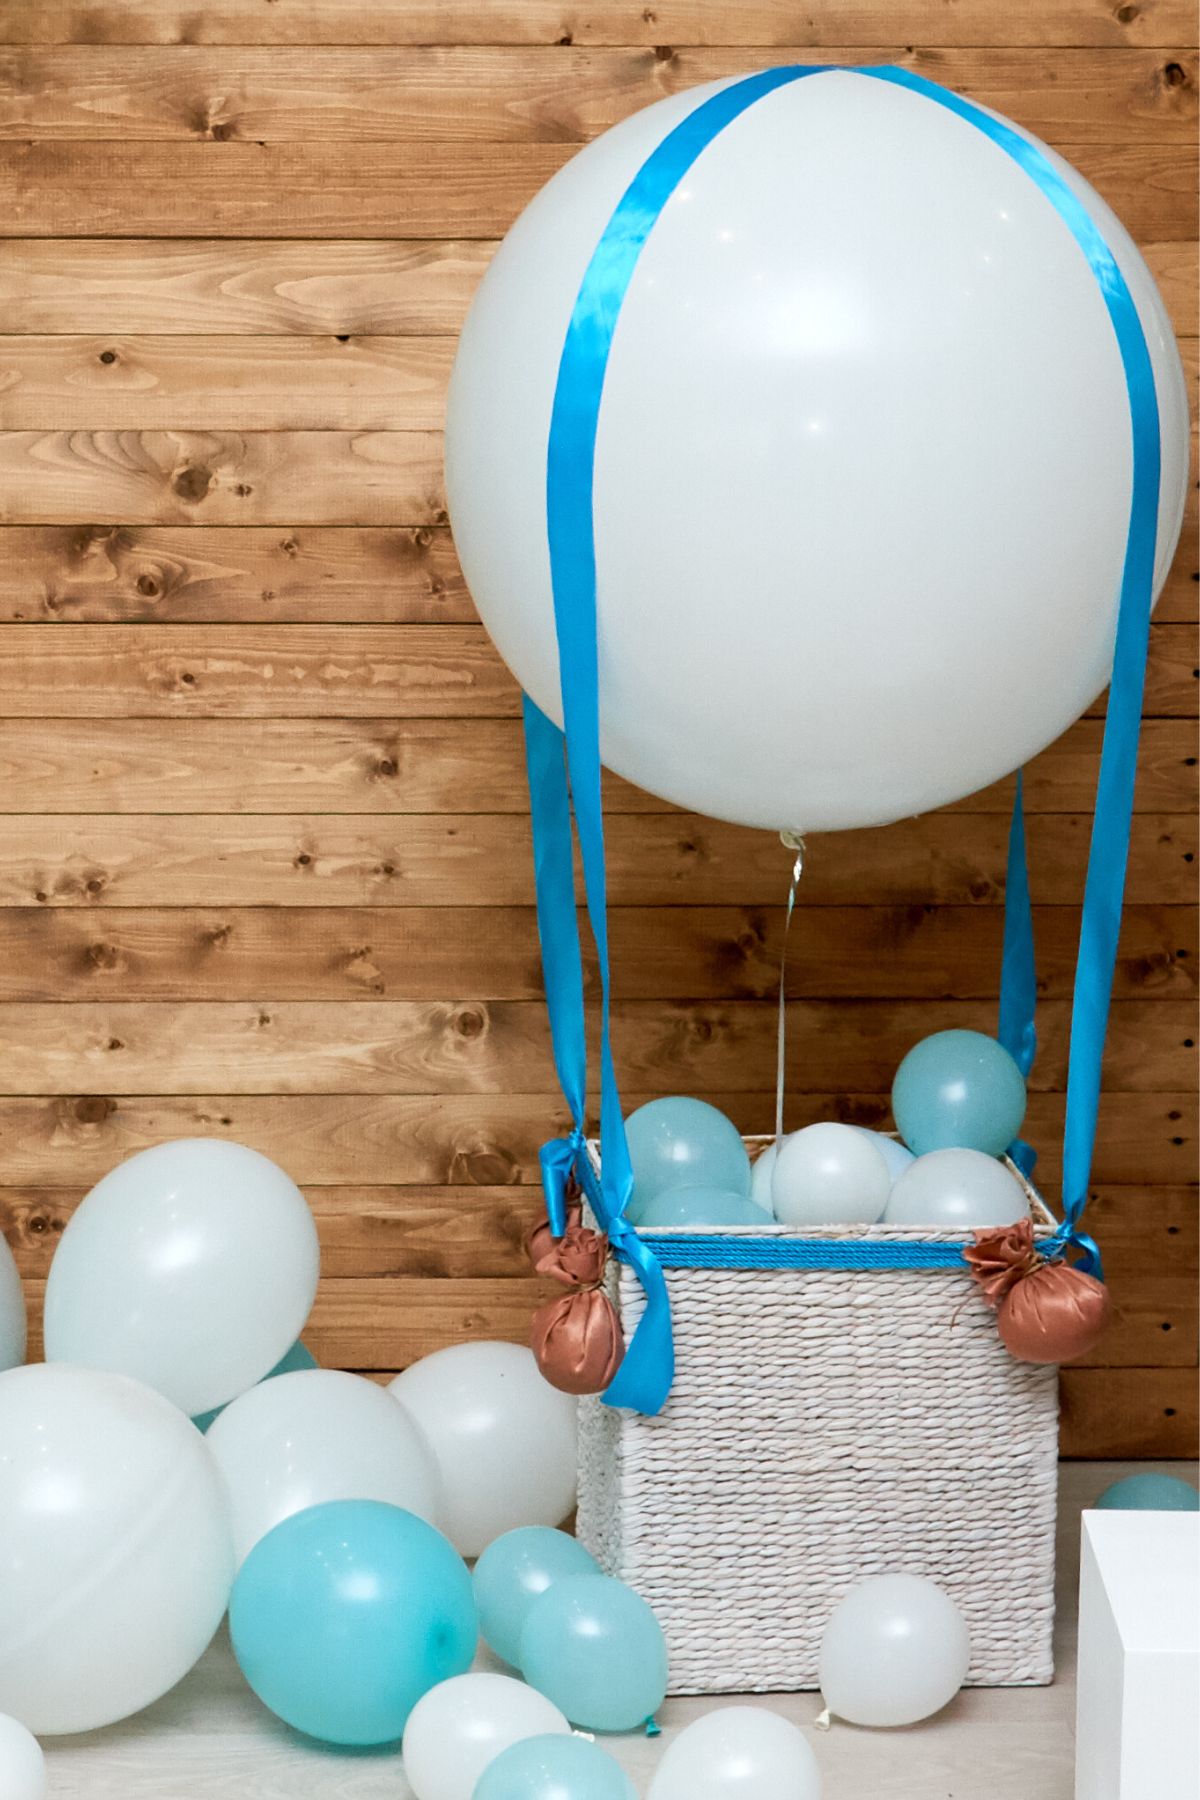 A mini hot air balloon baby shower decoration made from a wicker basket and ribbon.